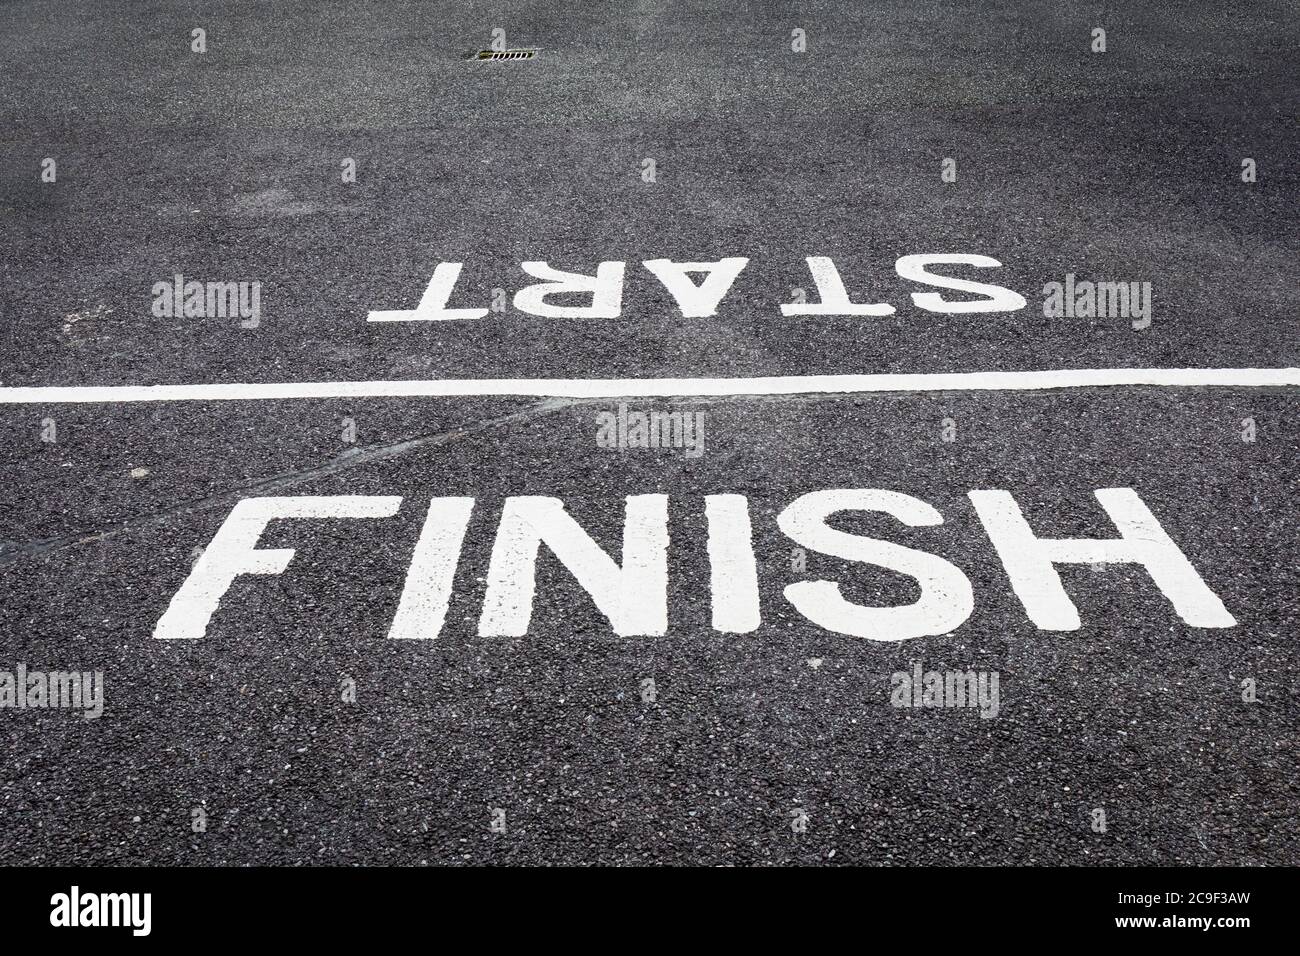 Start and finish line painted on road. Stock Photo